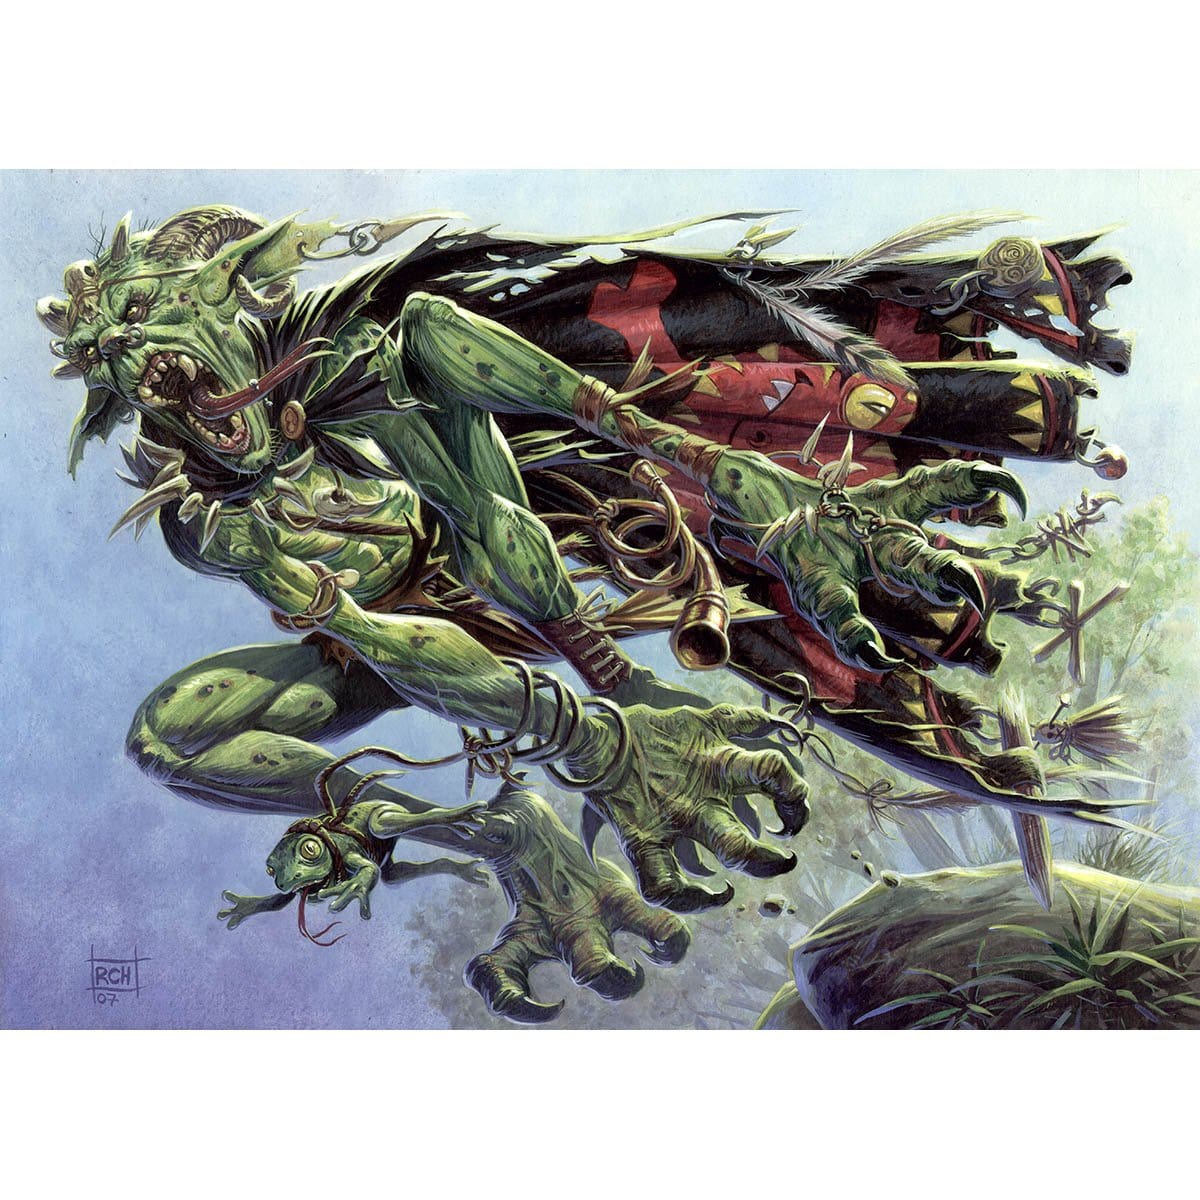 Frogtosser Banneret Print - Print - Original Magic Art - Accessories for Magic the Gathering and other card games